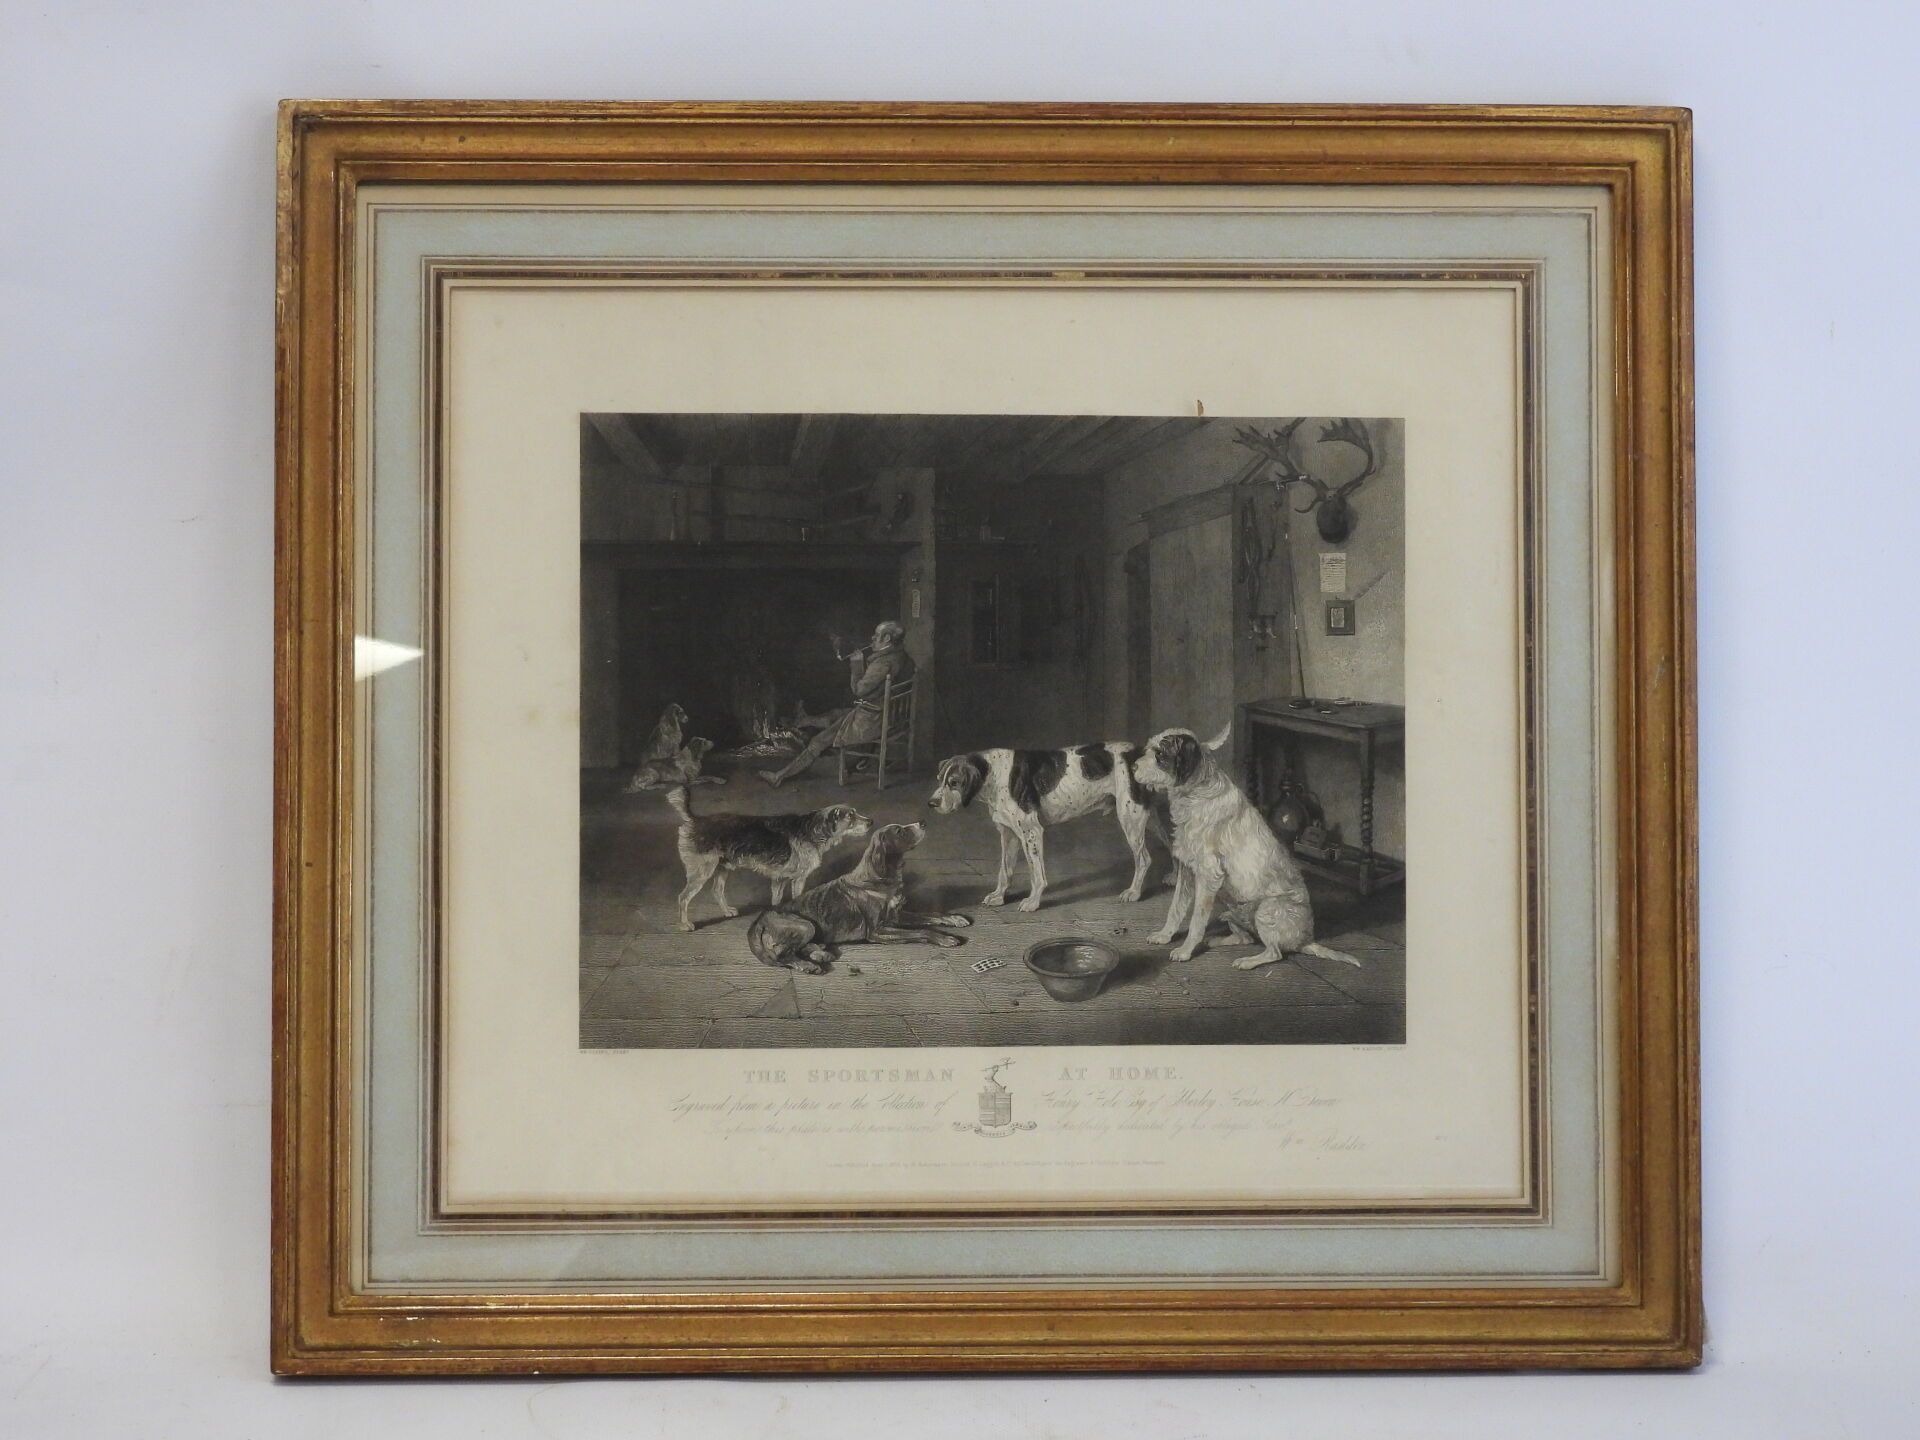 Null After W. COZINS : The sportsman at home. Black engraving on paper. 35 x 41 &hellip;